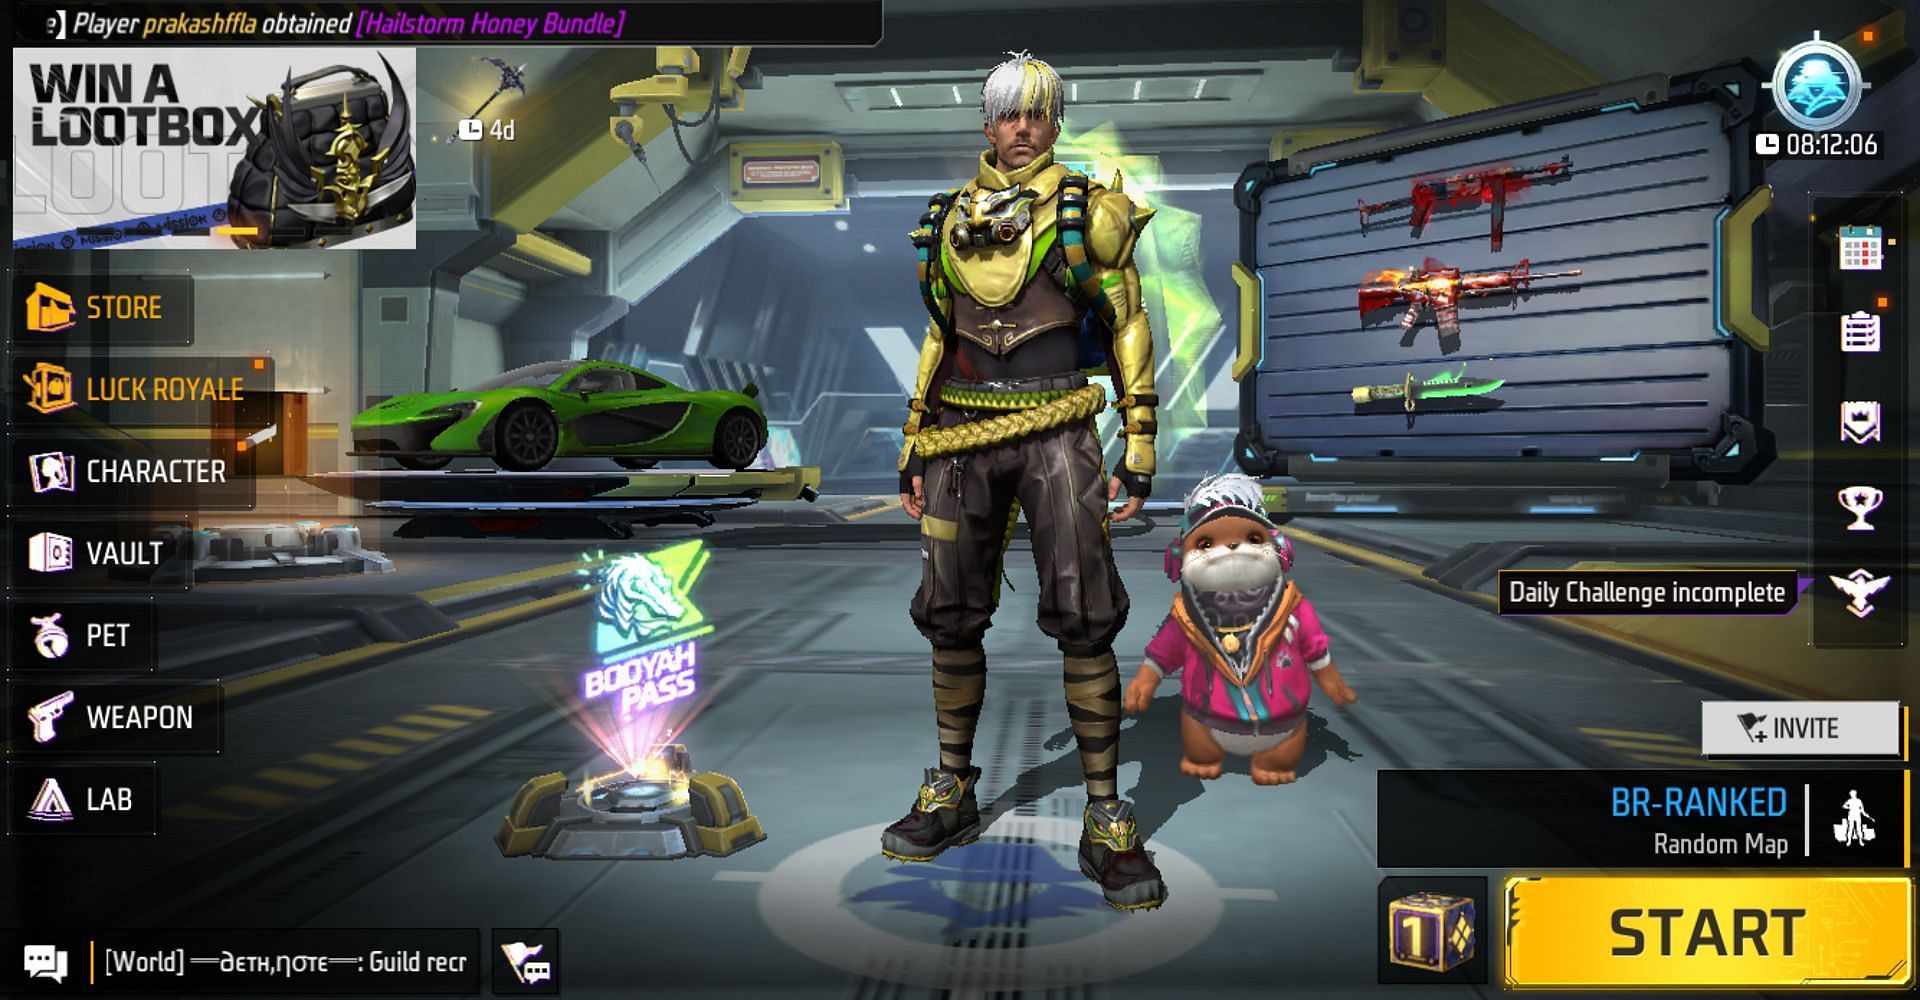 Click on the pet option from the menu on the left (Image via Garena)